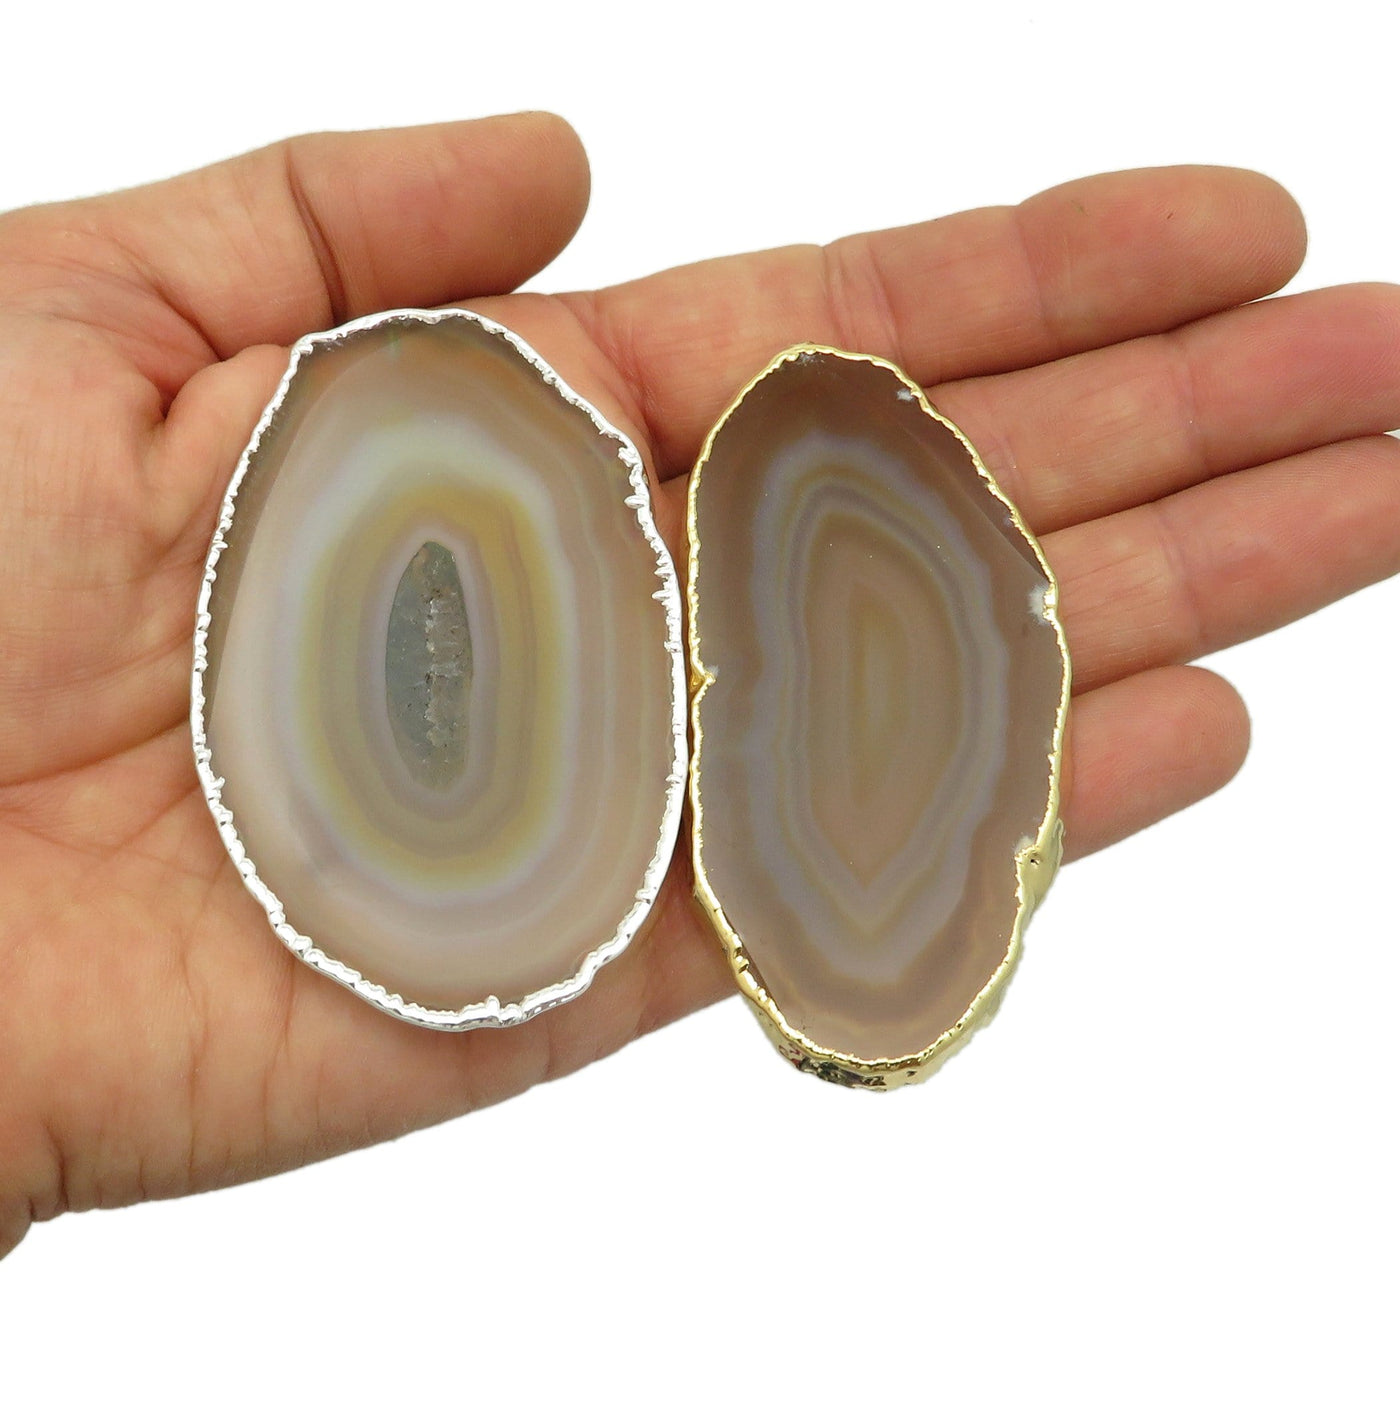 This picture is showing two of our natural agate plated edge, silver and gold tone in hand for size reference.